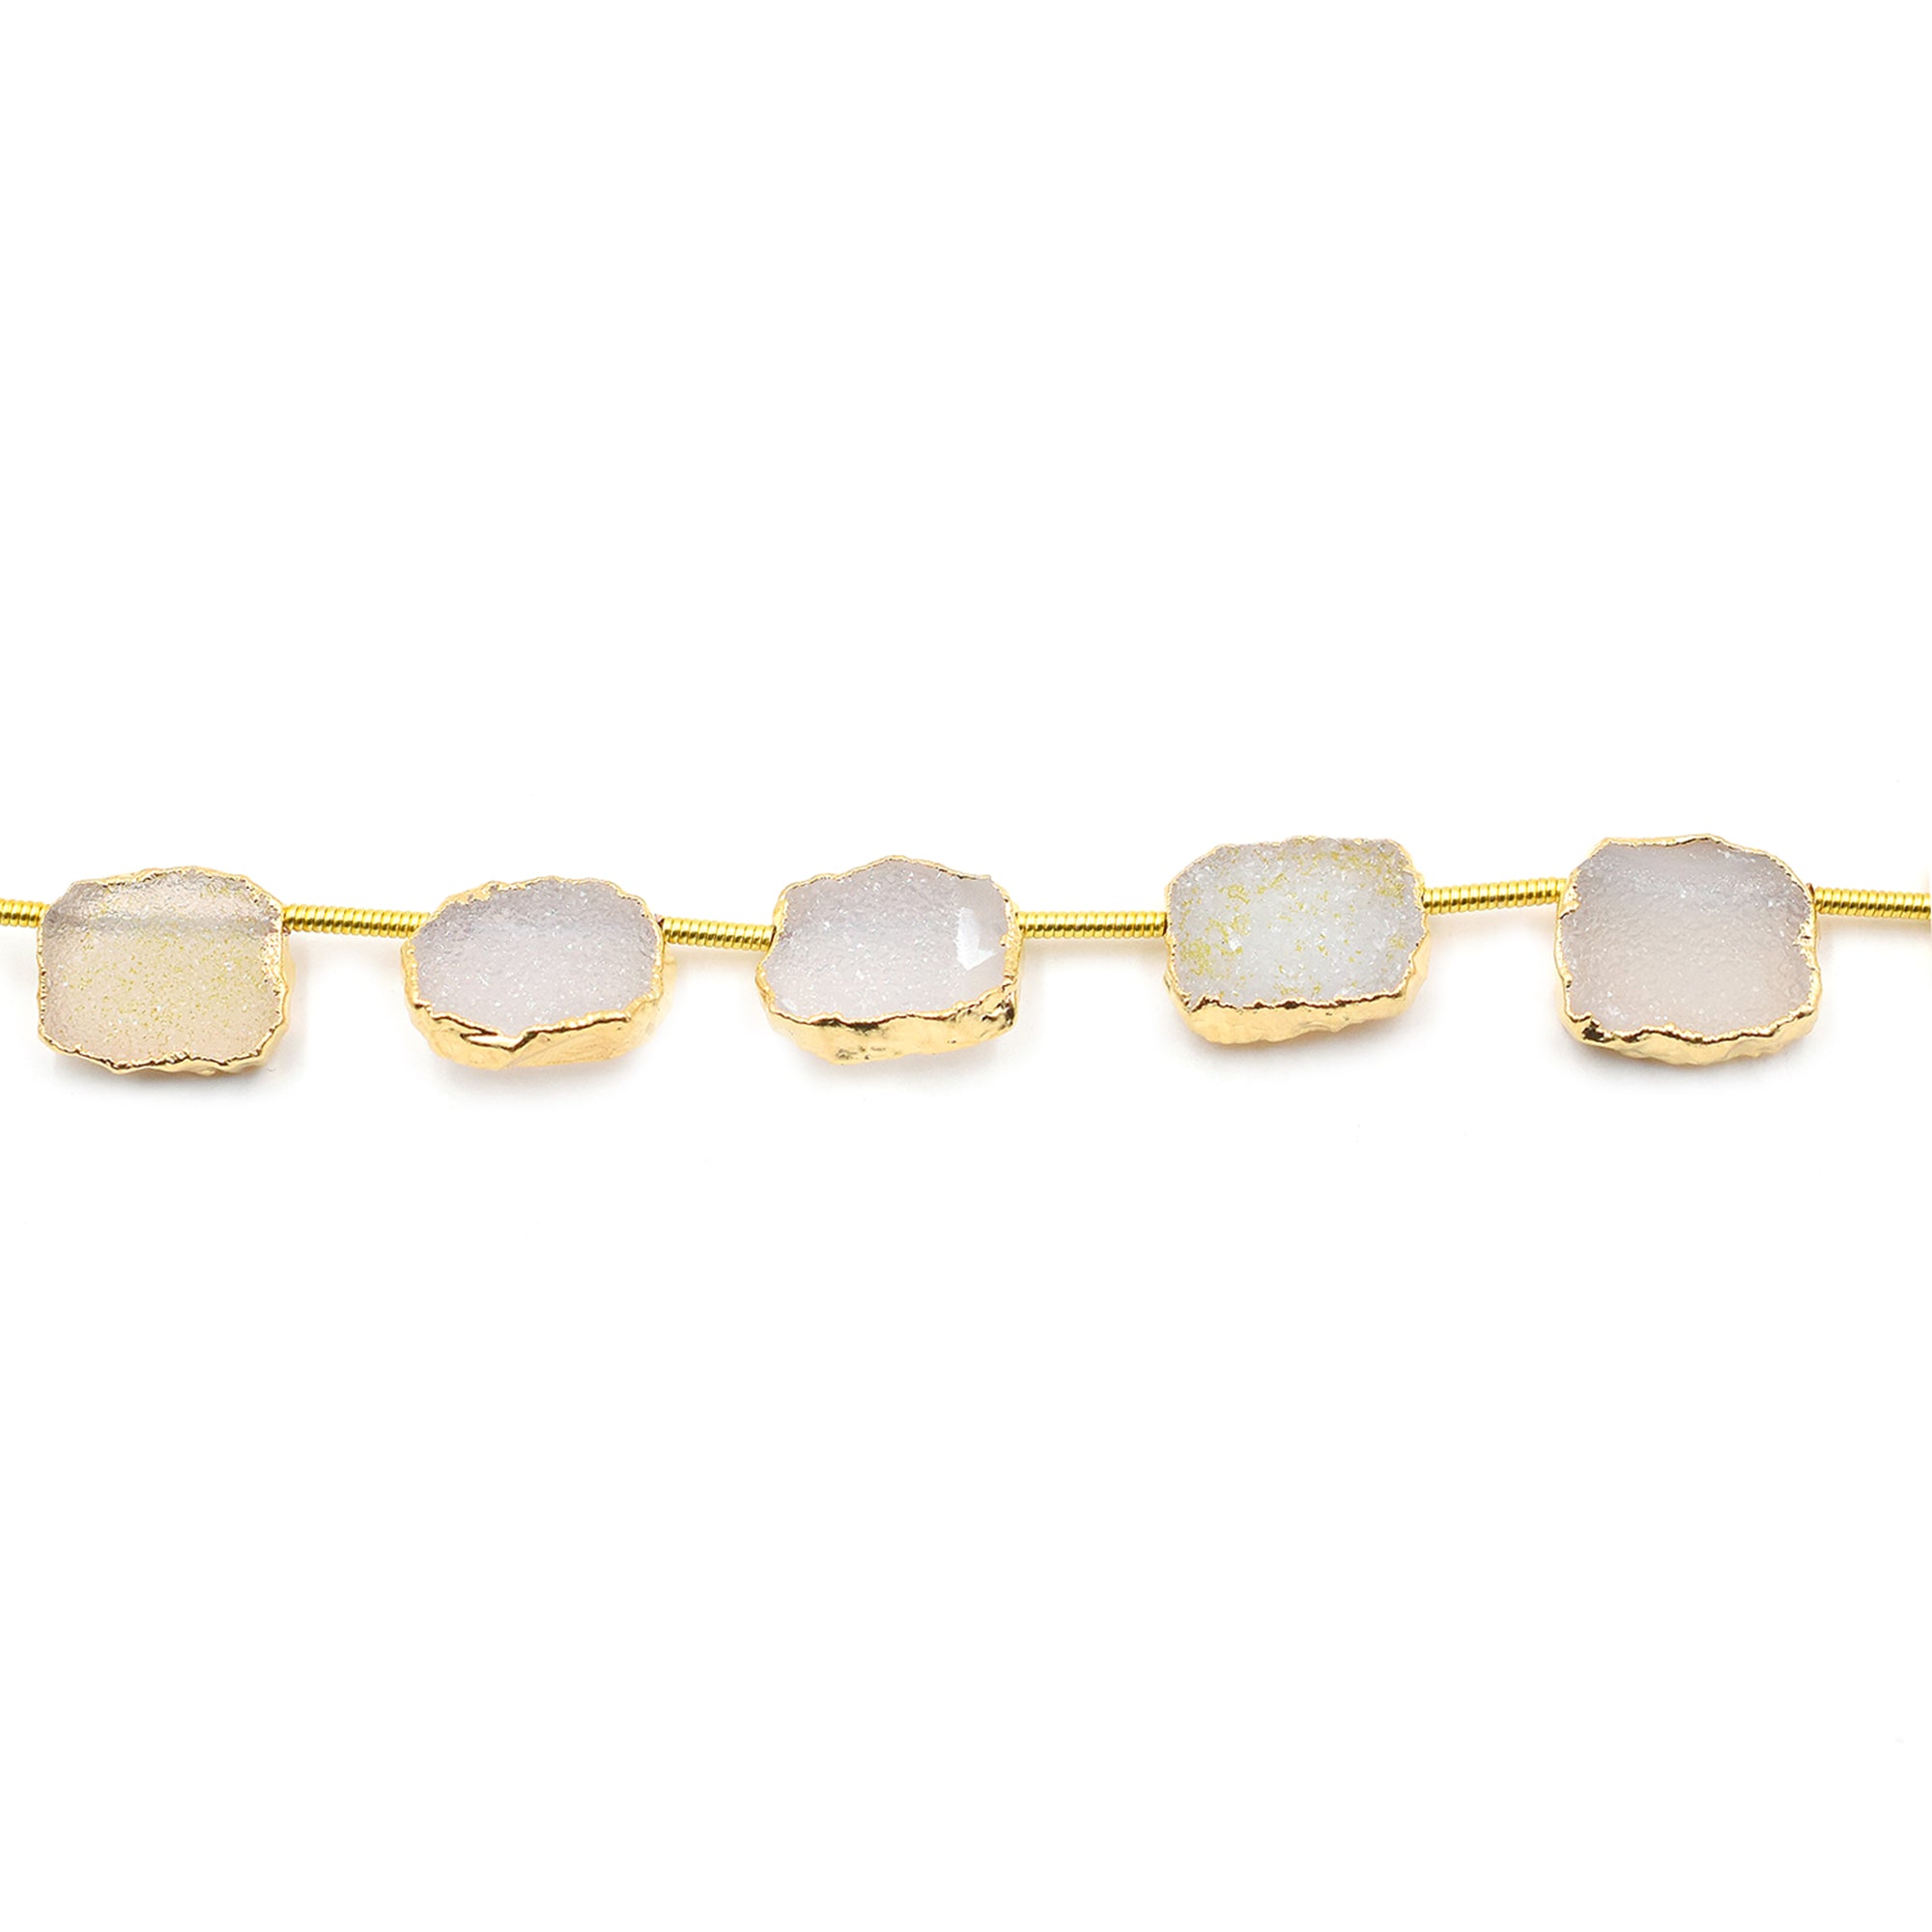 White Druzy 12X9 MM Rectangle Shape Side Drilled Gold Electroplated Strand